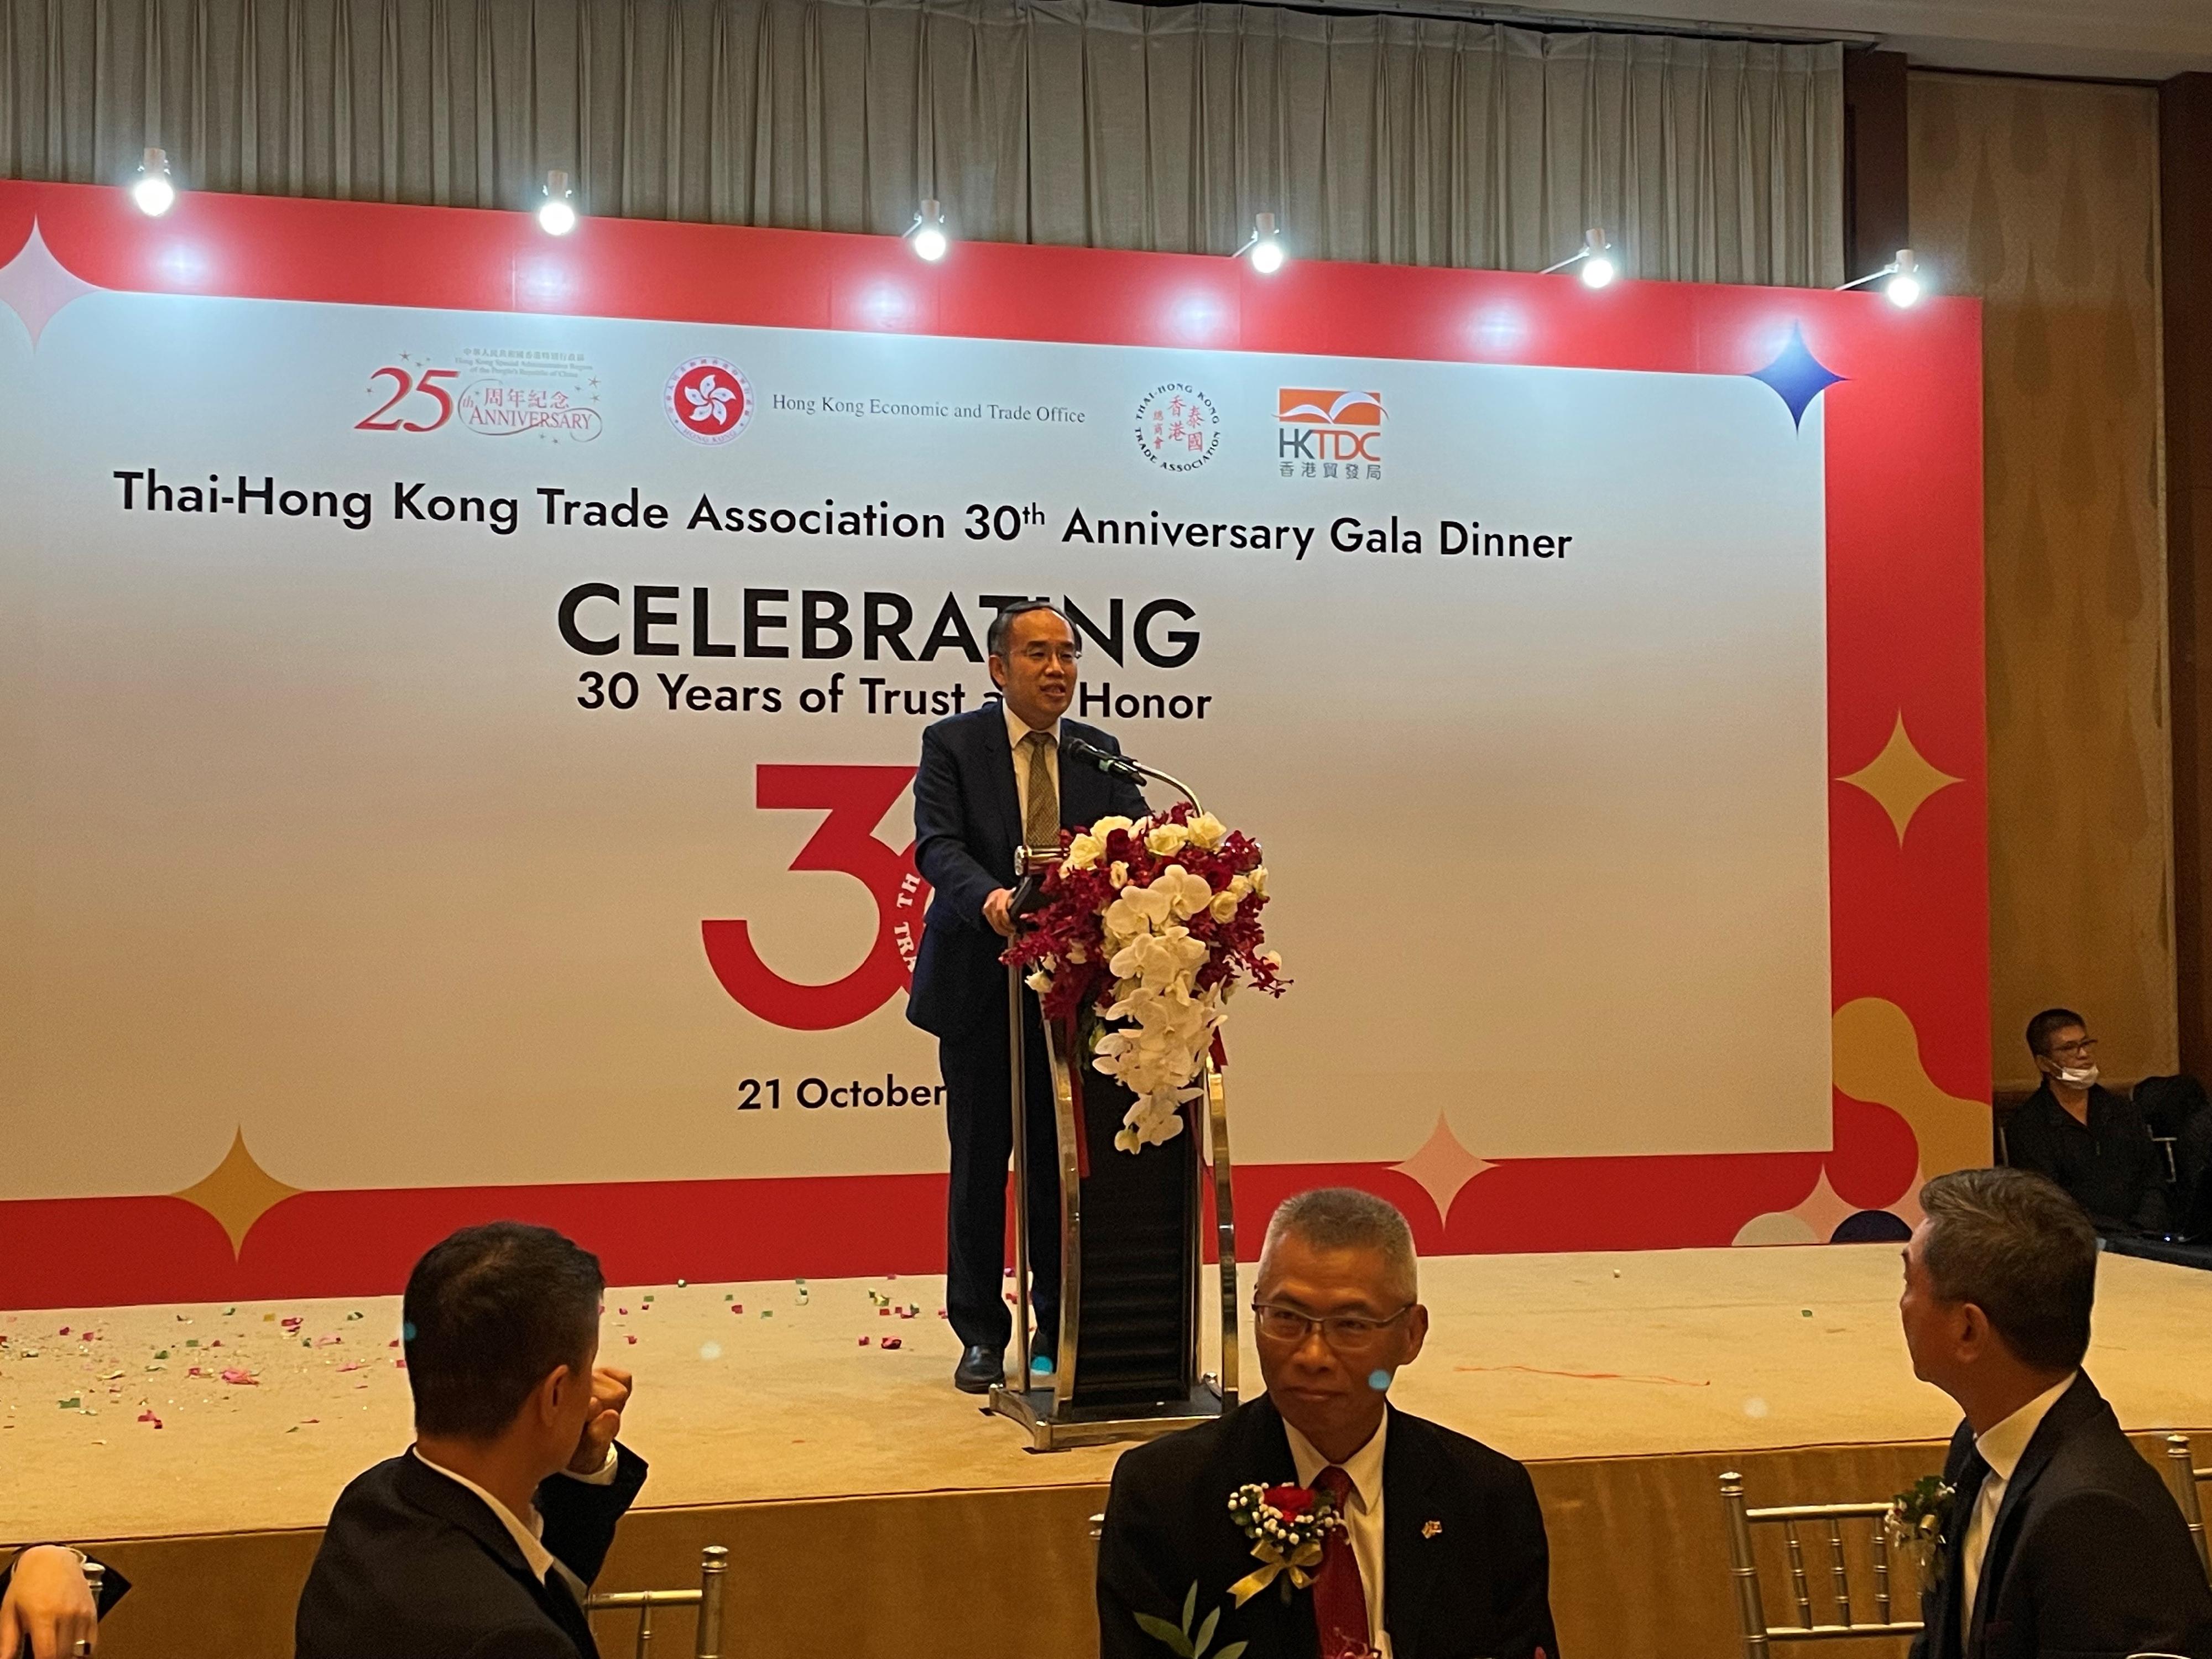 The Secretary for Financial Services and the Treasury, Mr Christopher Hui, today (October 21) continued his visit to Thailand. Photo shows Mr Hui speaking at the Thai-Hong Kong Trade Association 30th Anniversary Gala Dinner.